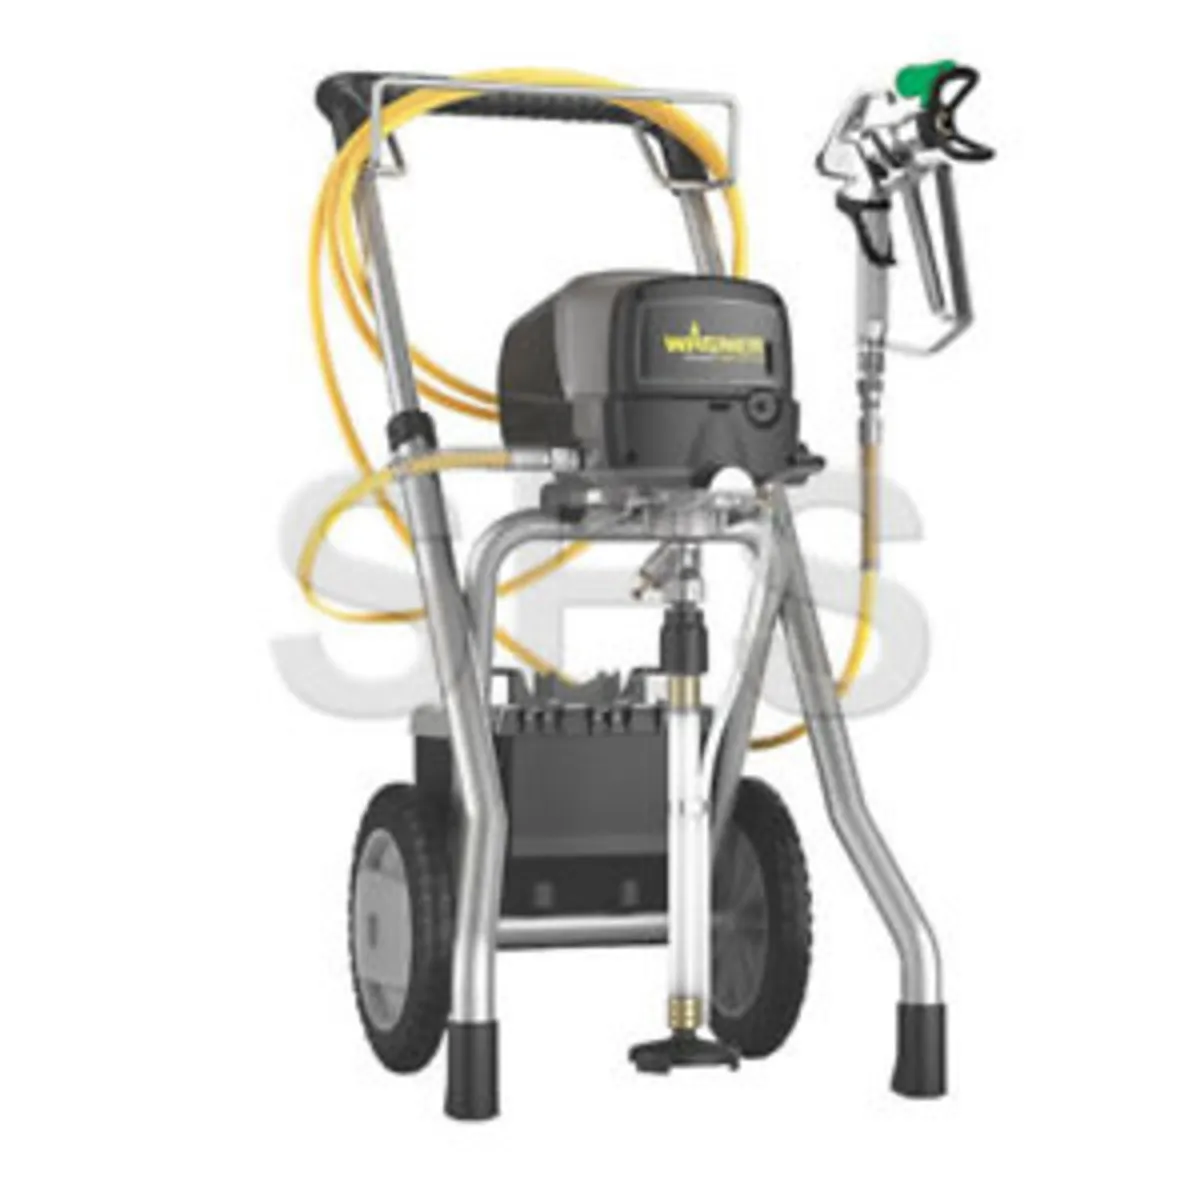 Wagner HEA PP90 Extra Paint Sprayer -Trolley